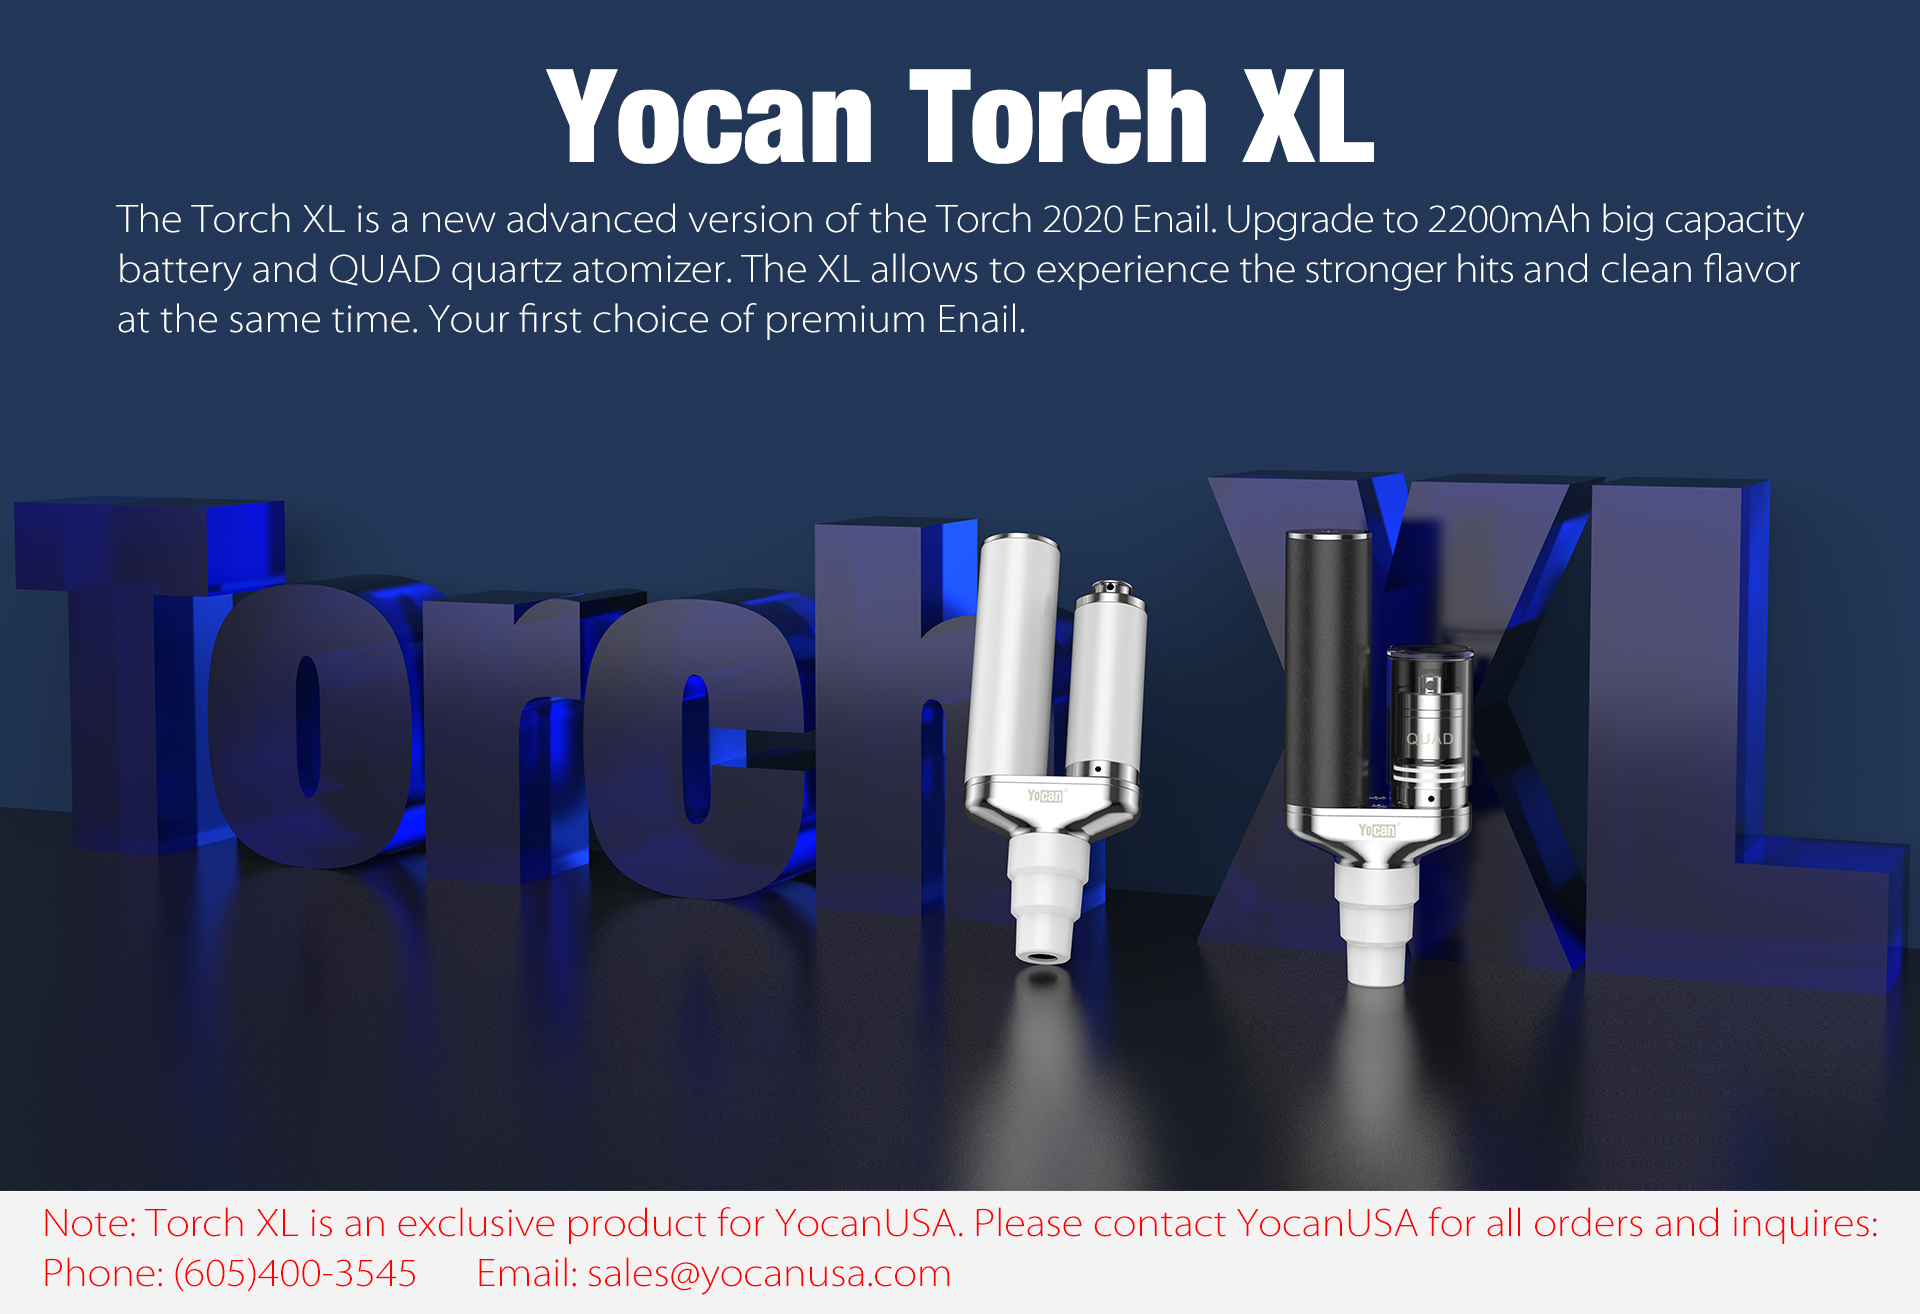 Yocan Torch XL allows to experience the stronger hits and clean flavor at the same time. Your first choice of premium Enail.